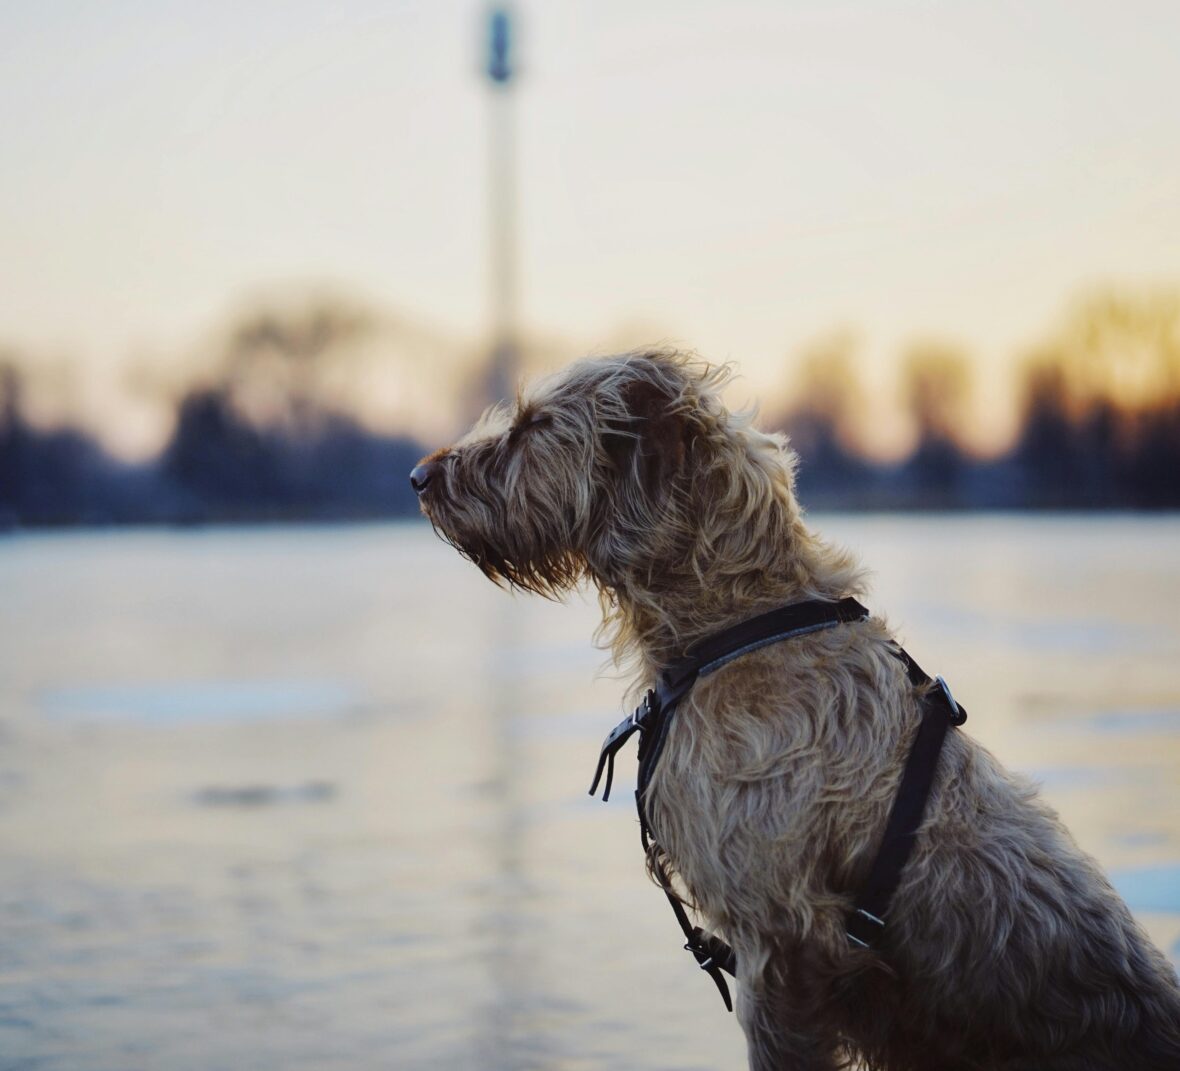 An Irish Wolfhound standing near the lakeside, Irish Wolfhounds are among the dog breeds with the shortest lifespans